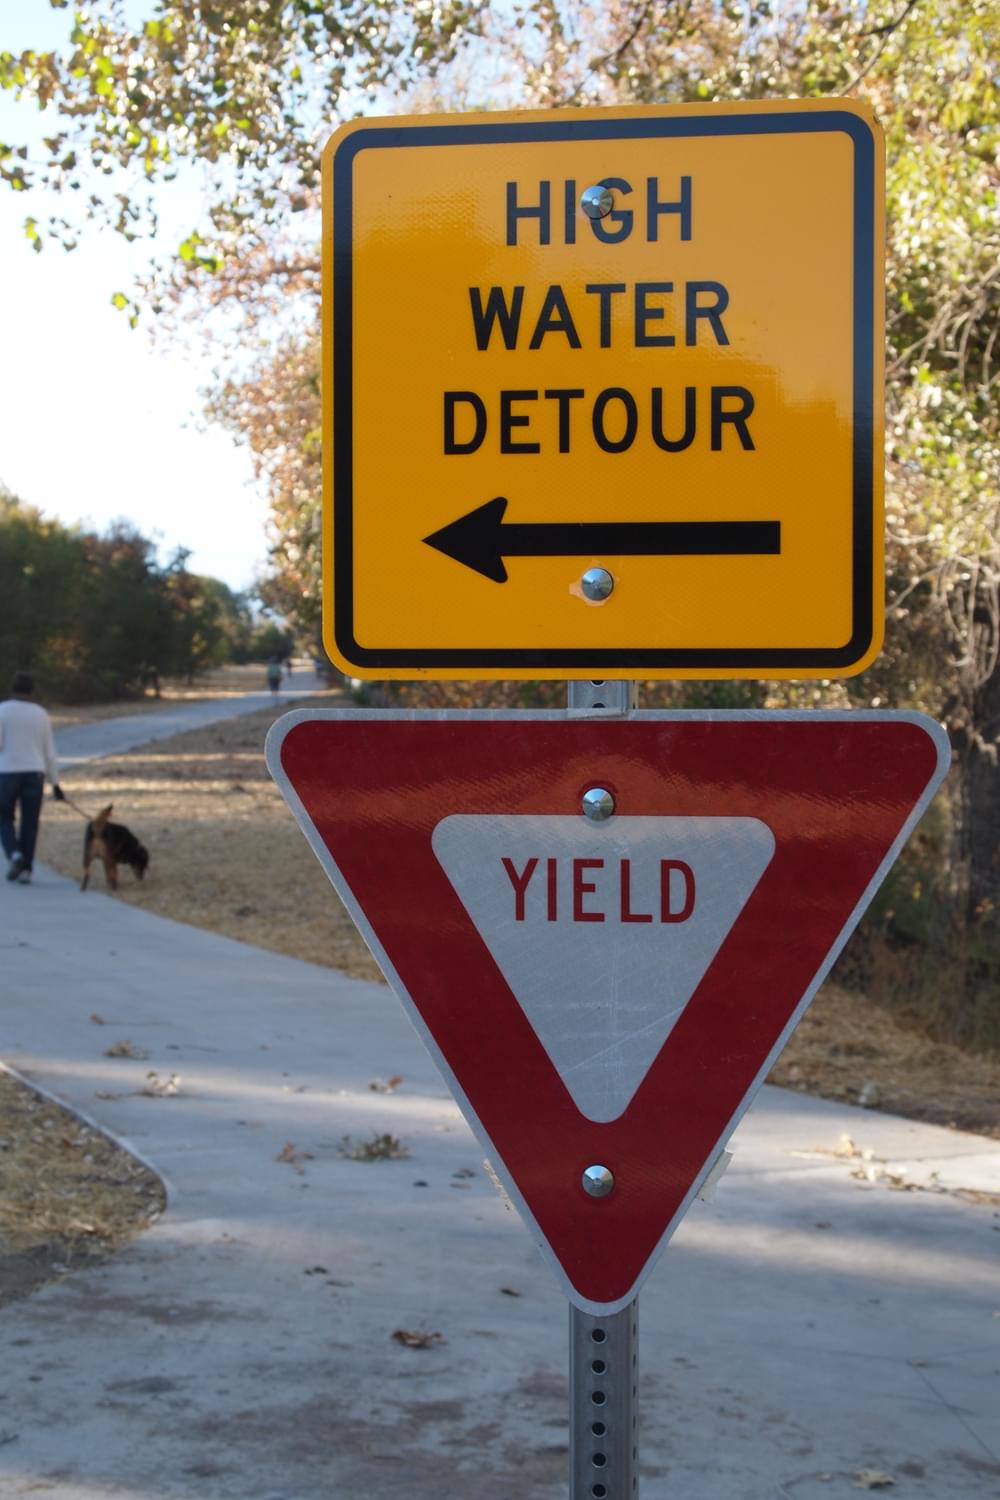 Yield signpost is used for trail detour direction in case of flood; Cherry Creek Trail in Denver 